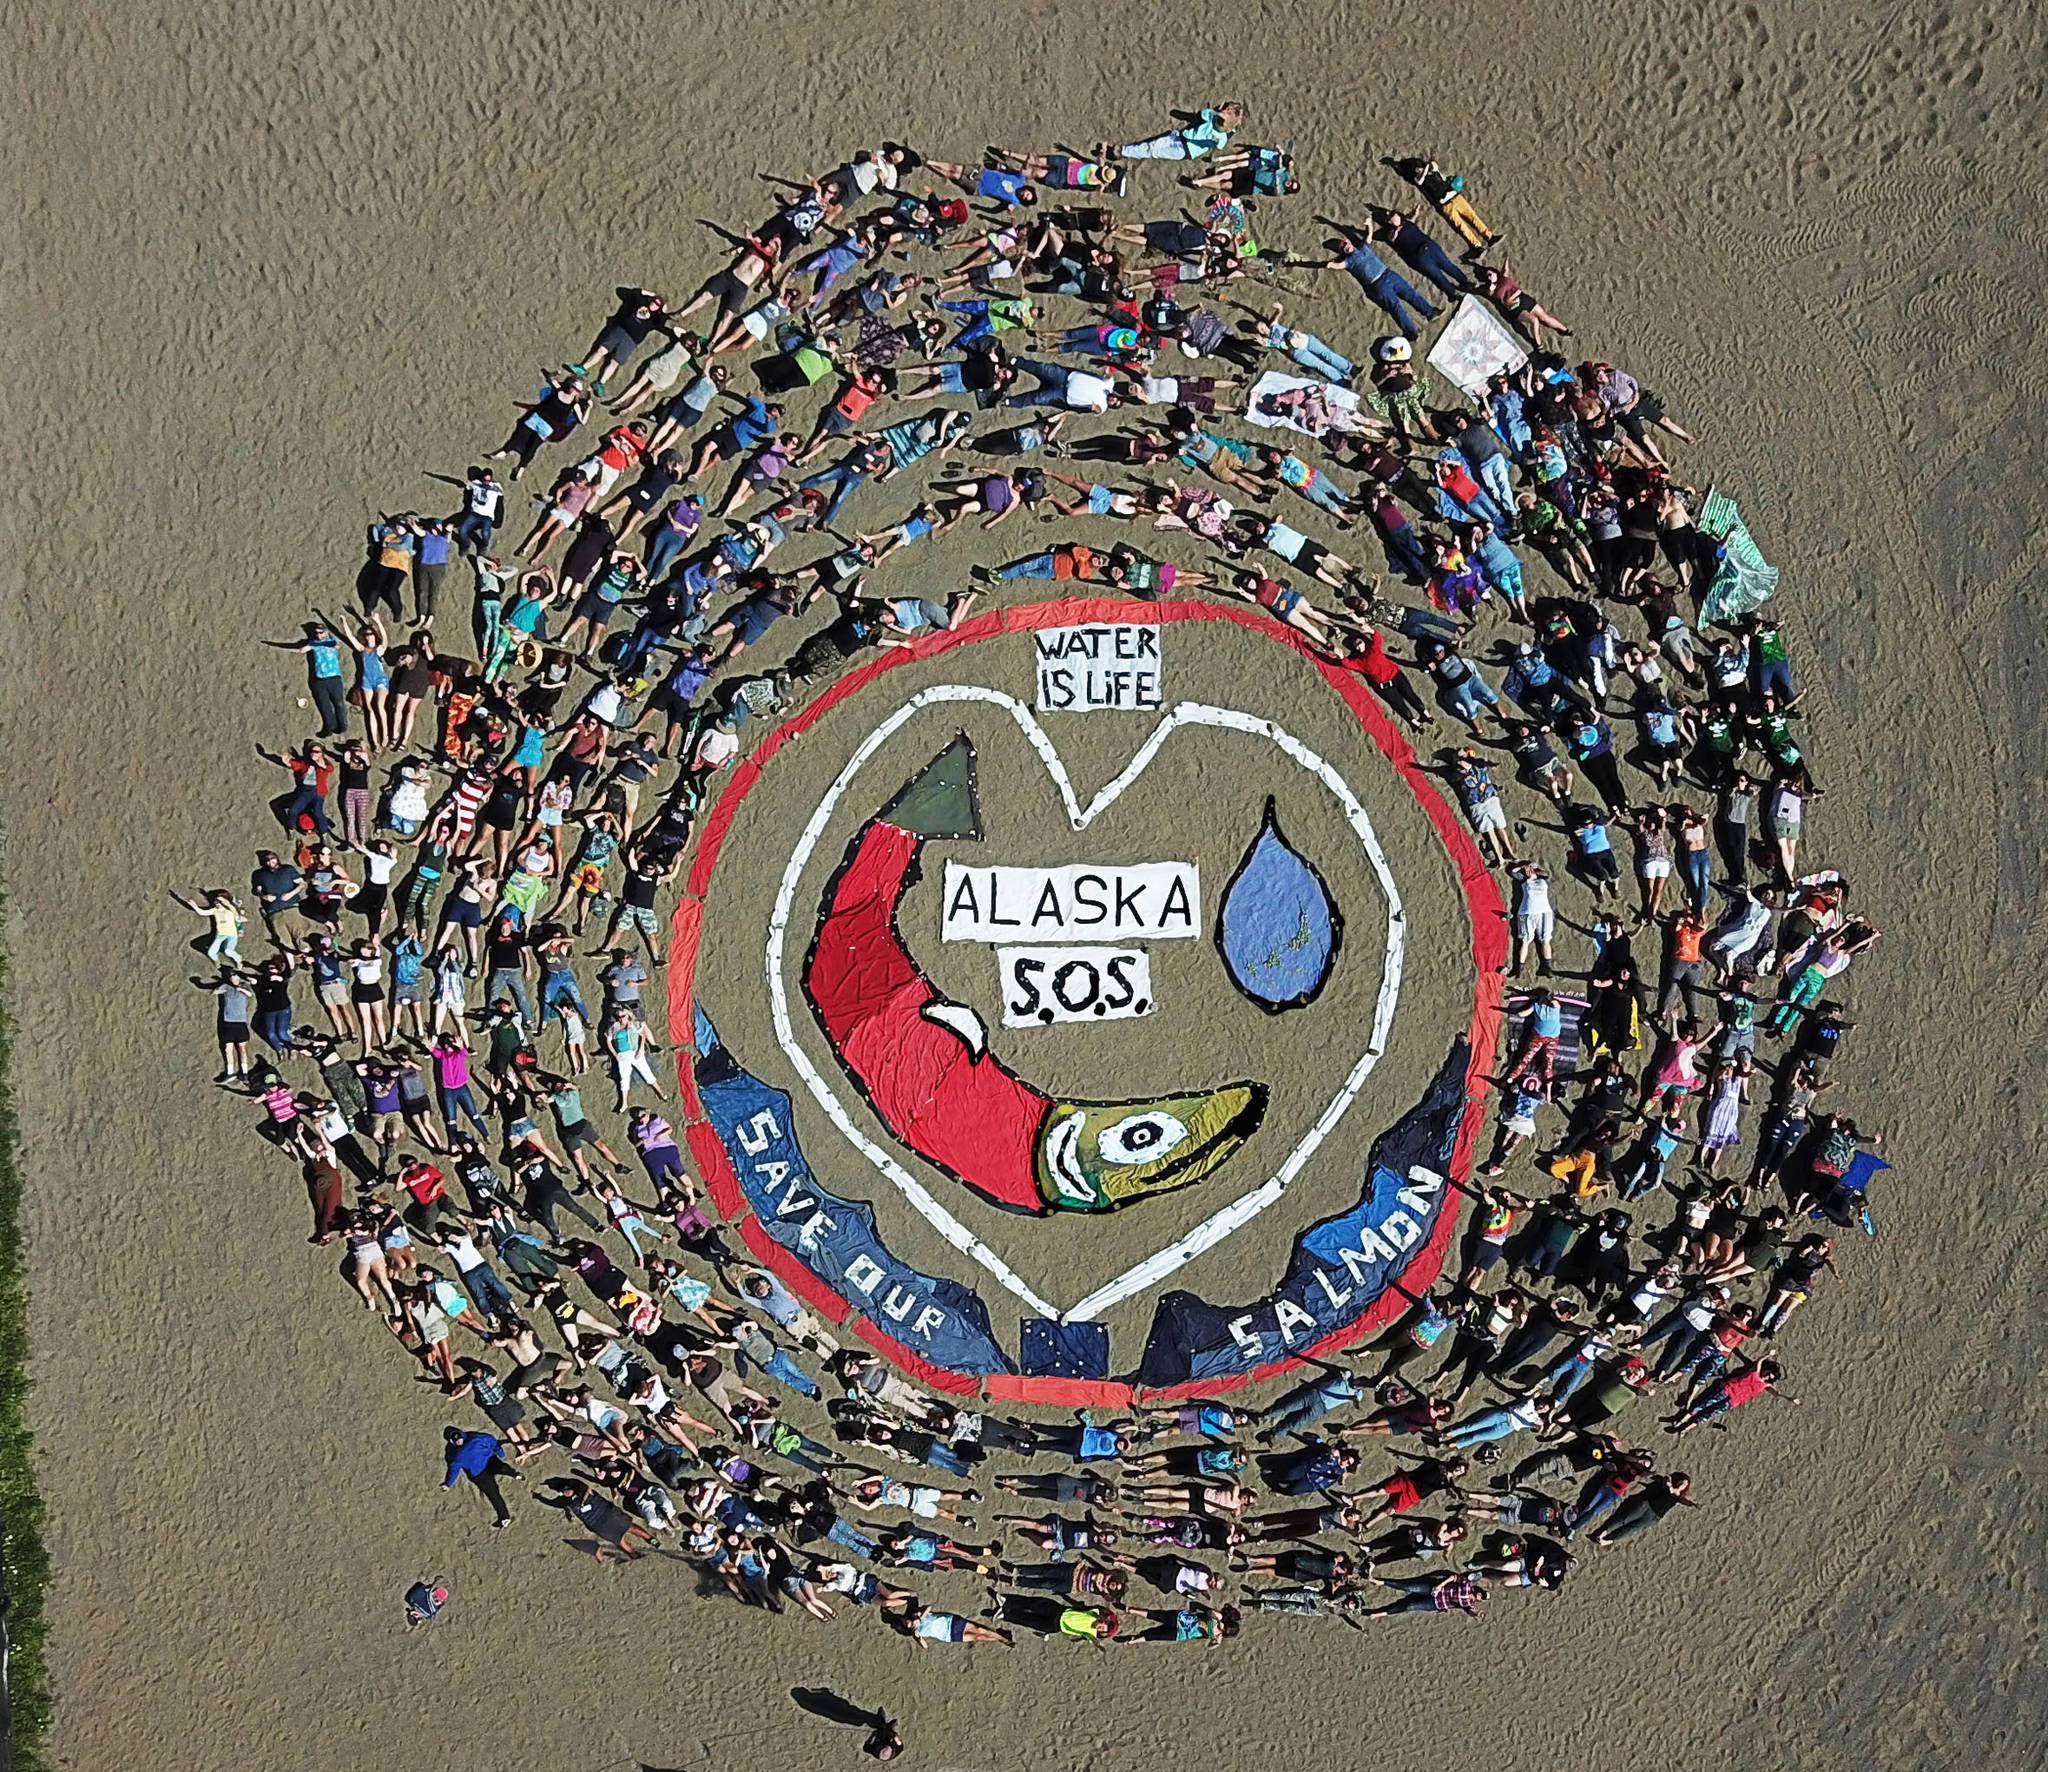 Salmonfest attendees participate in the annual art installation by Homer artist and activist Mavis Muller on Saturday, Aug. 3, 2019 at Salmonfest in Ninilchik, Alaska. The message of this year’s art piece was “S.O.S.” or “Save our salmon.” (Photo by Brandon Hill)